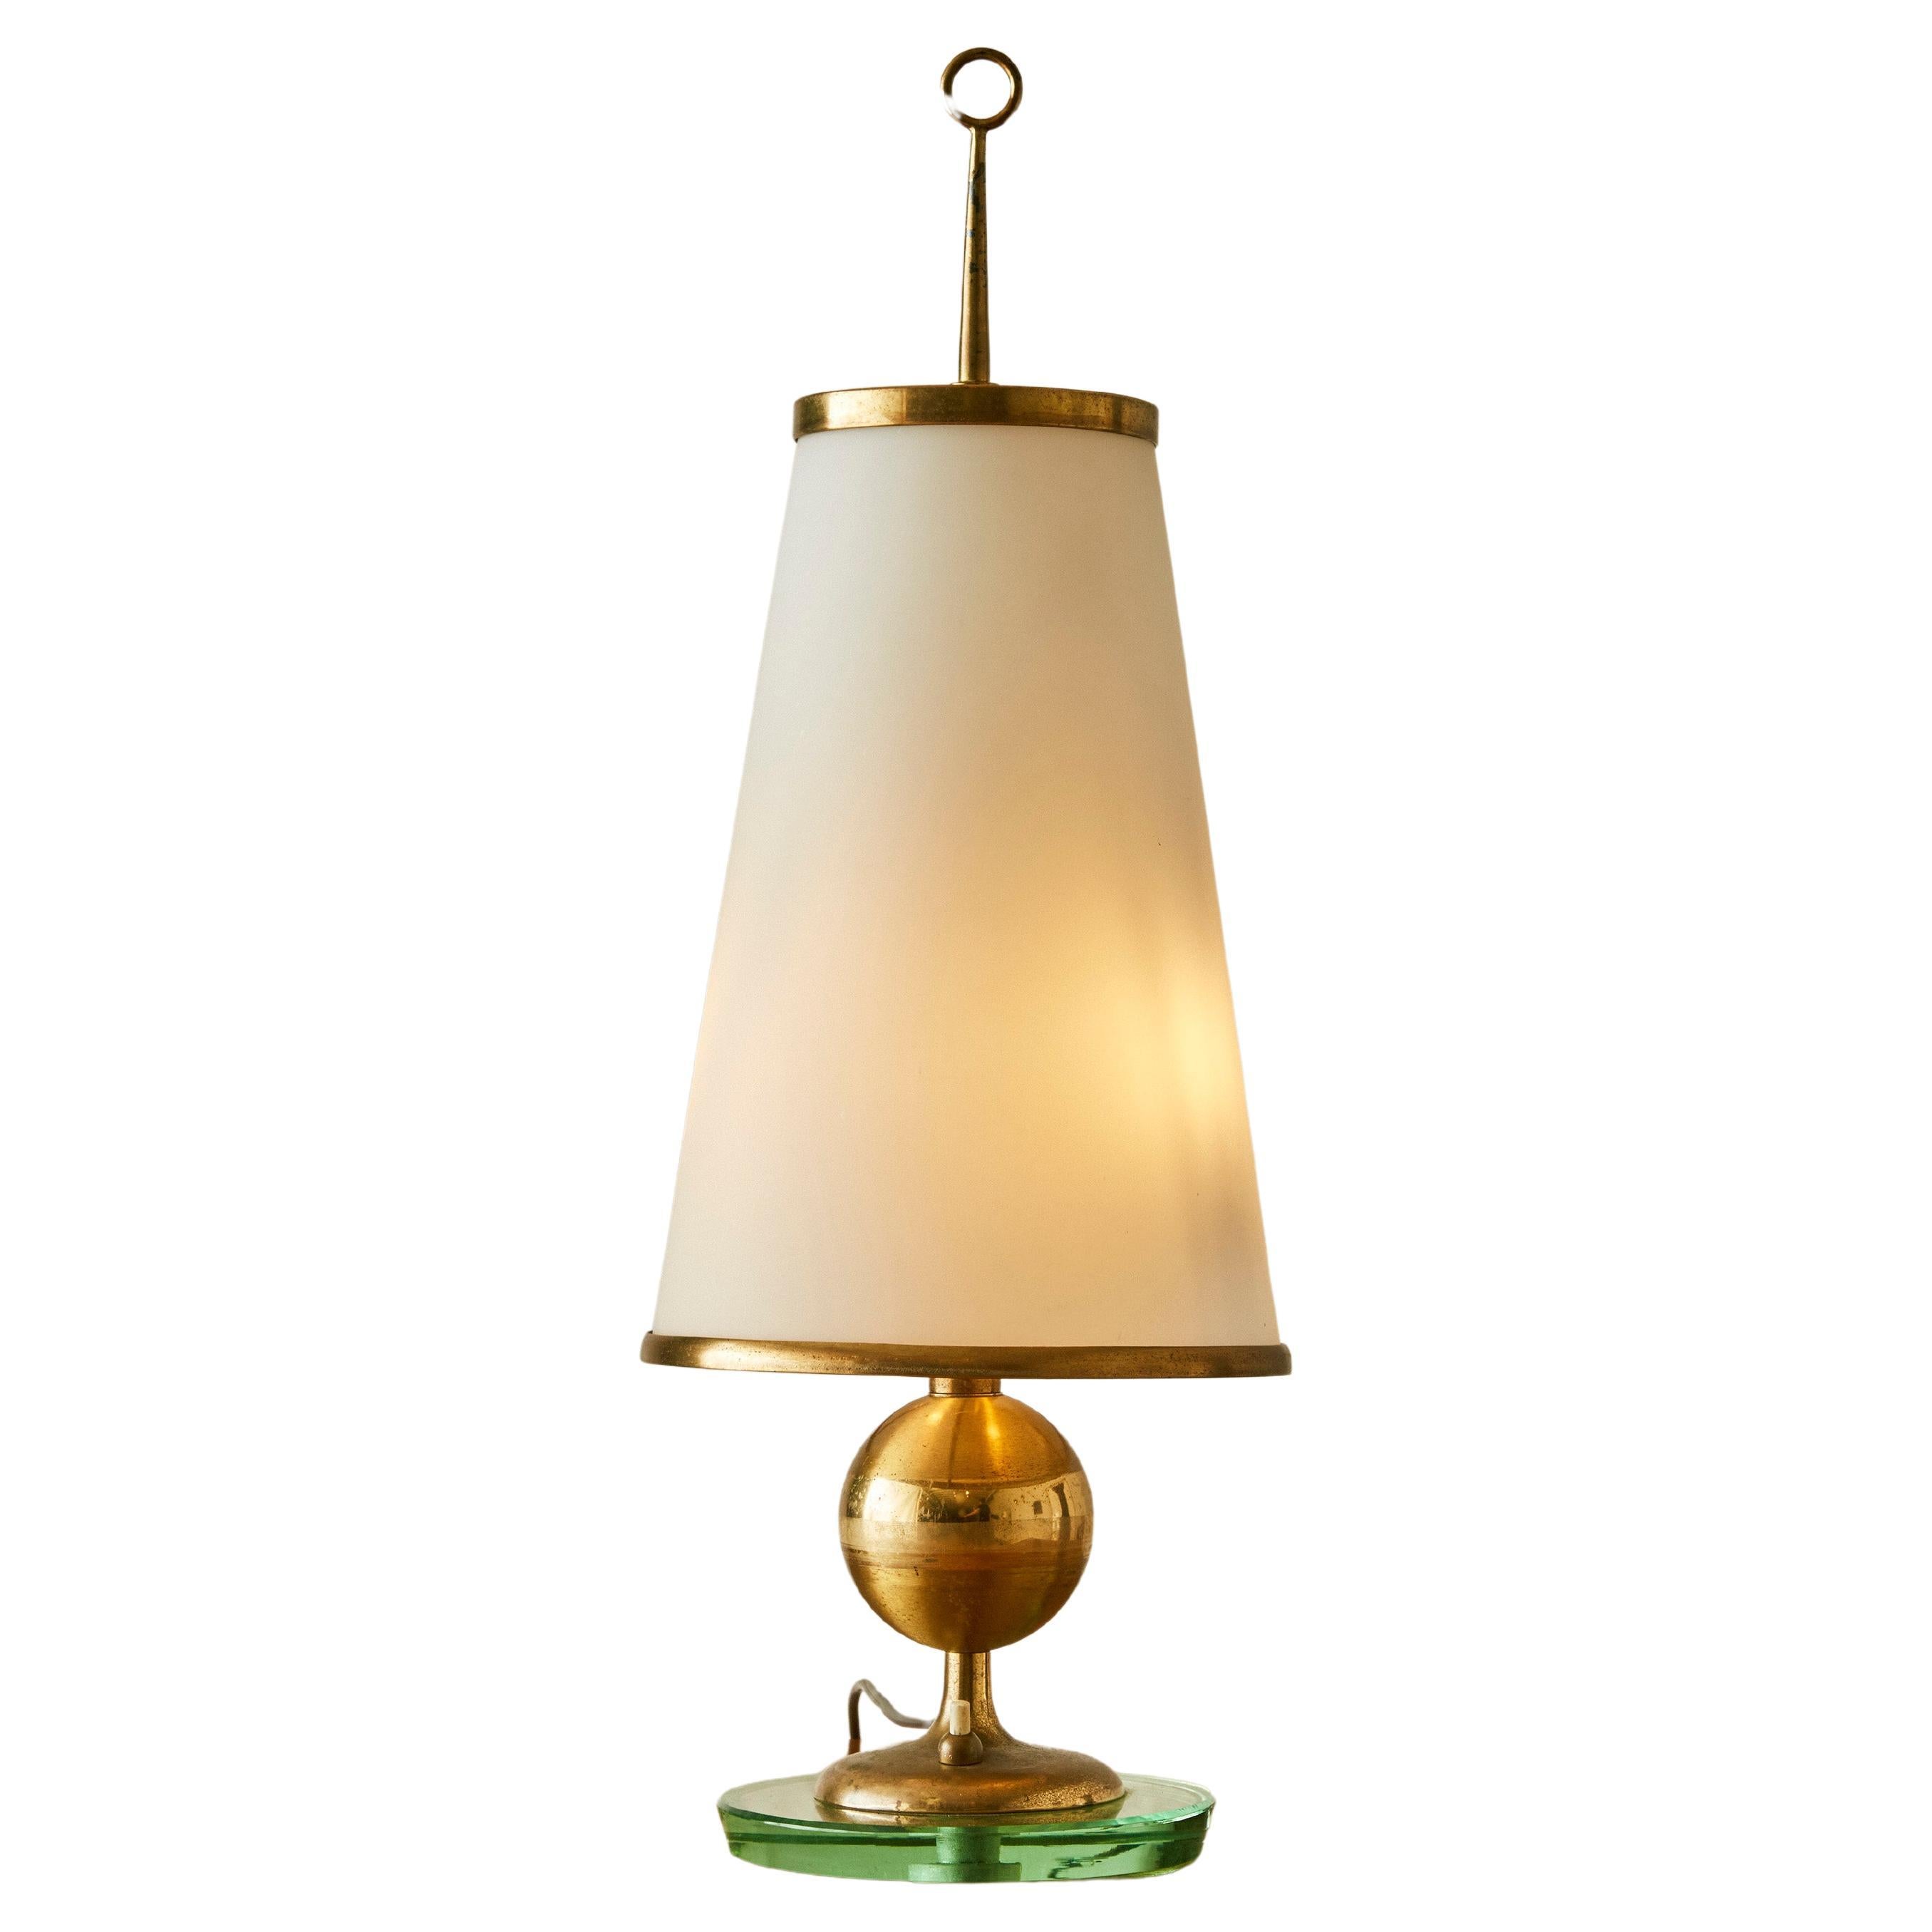 A large table lamp by Fontana For Sale